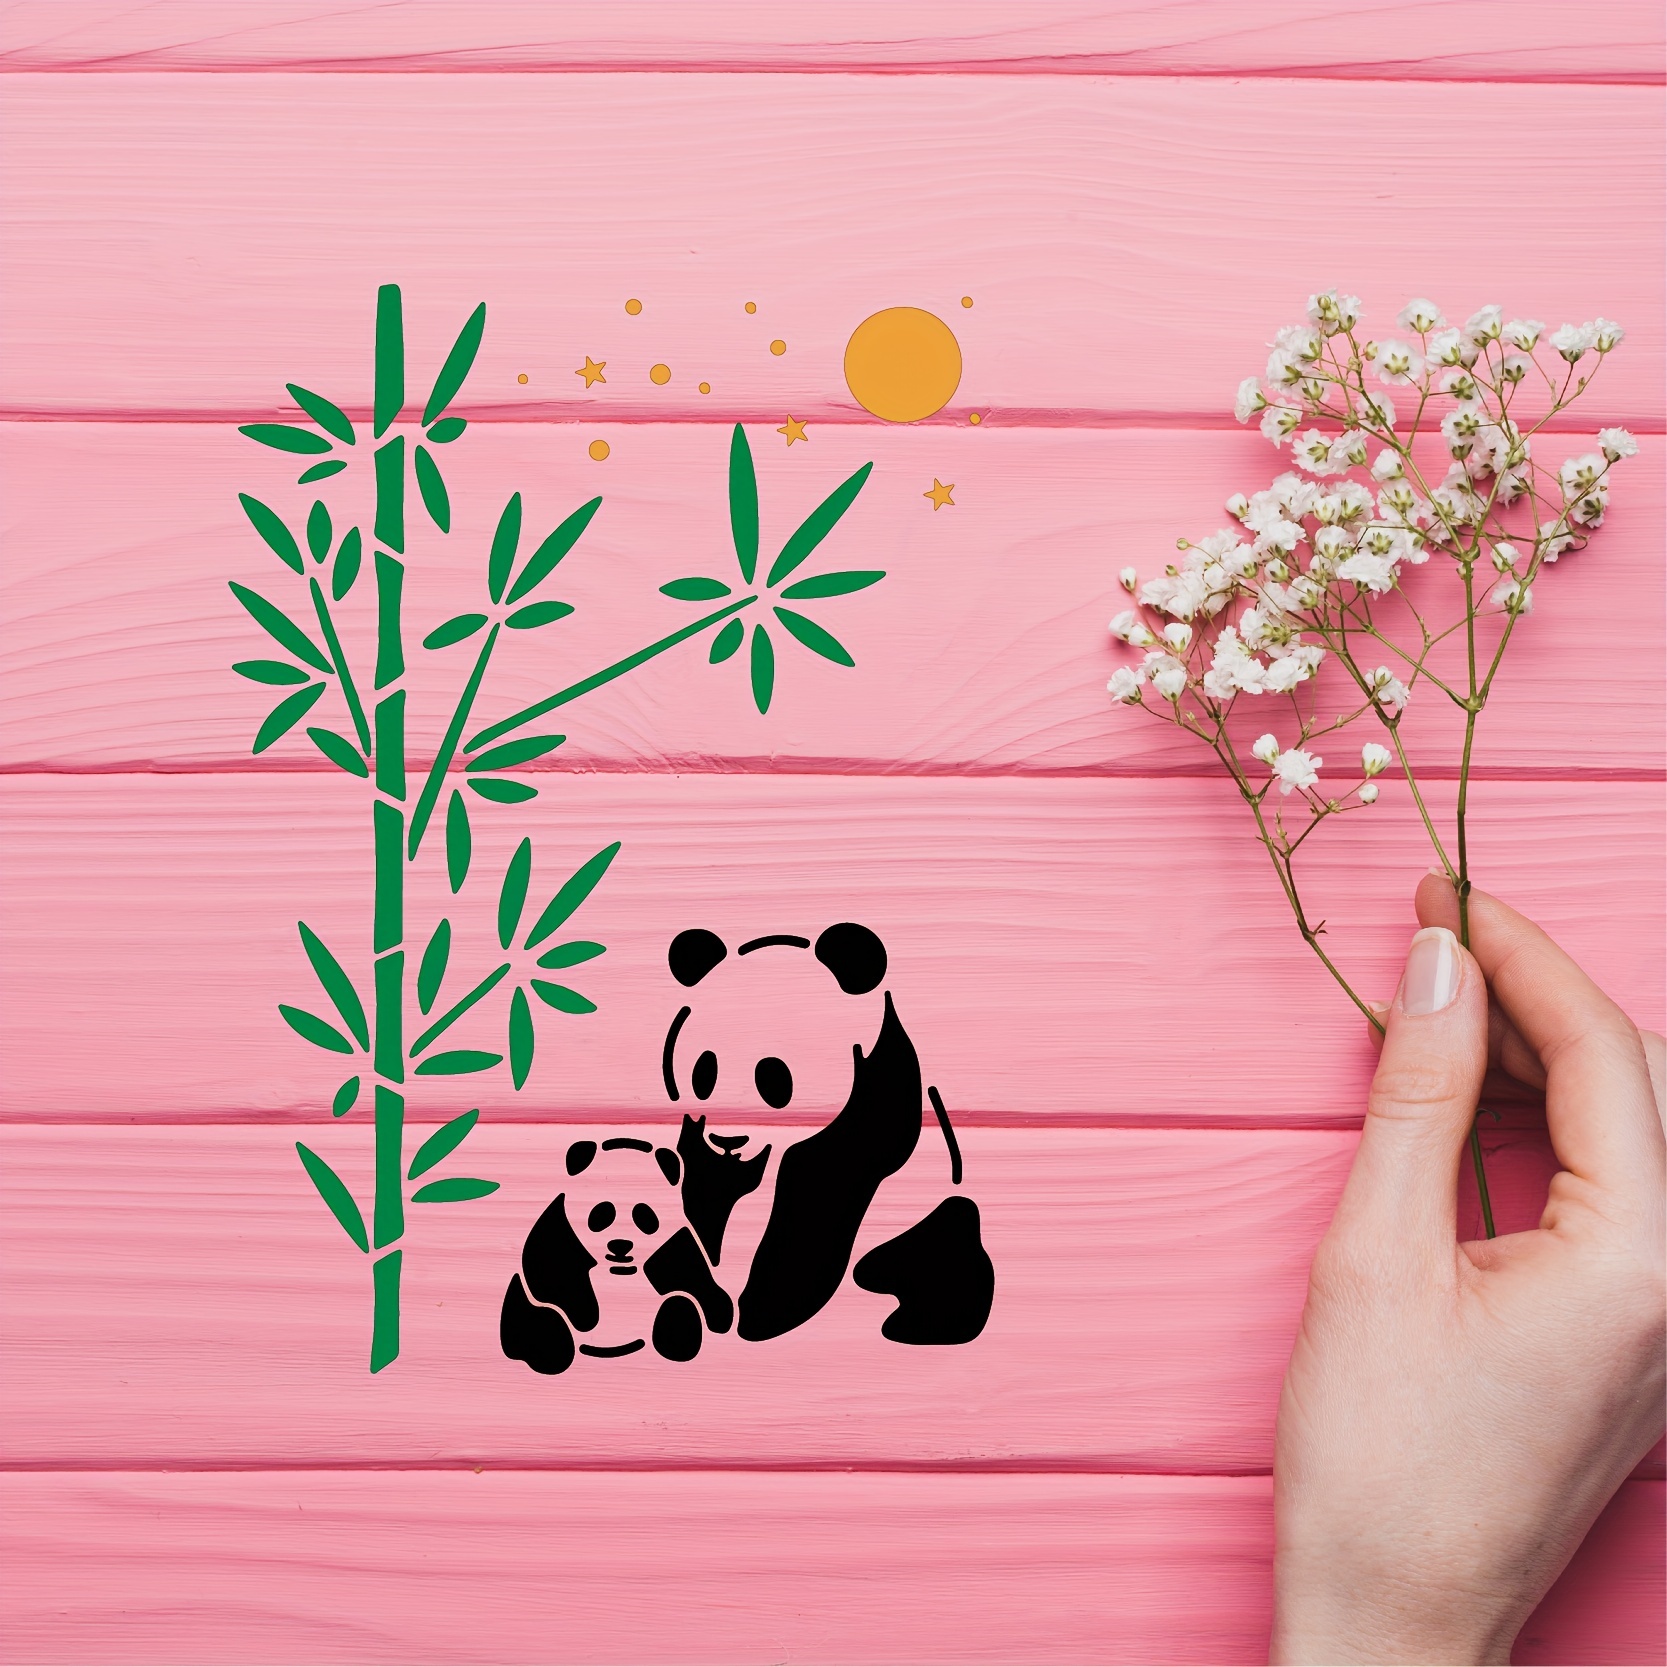 3pcs Panda Stencil, A4 Size Panda Mother With Bamboo Stencils For Wood  Carving Drawings Engraving Scrapbooking Journal Project DIY Painting